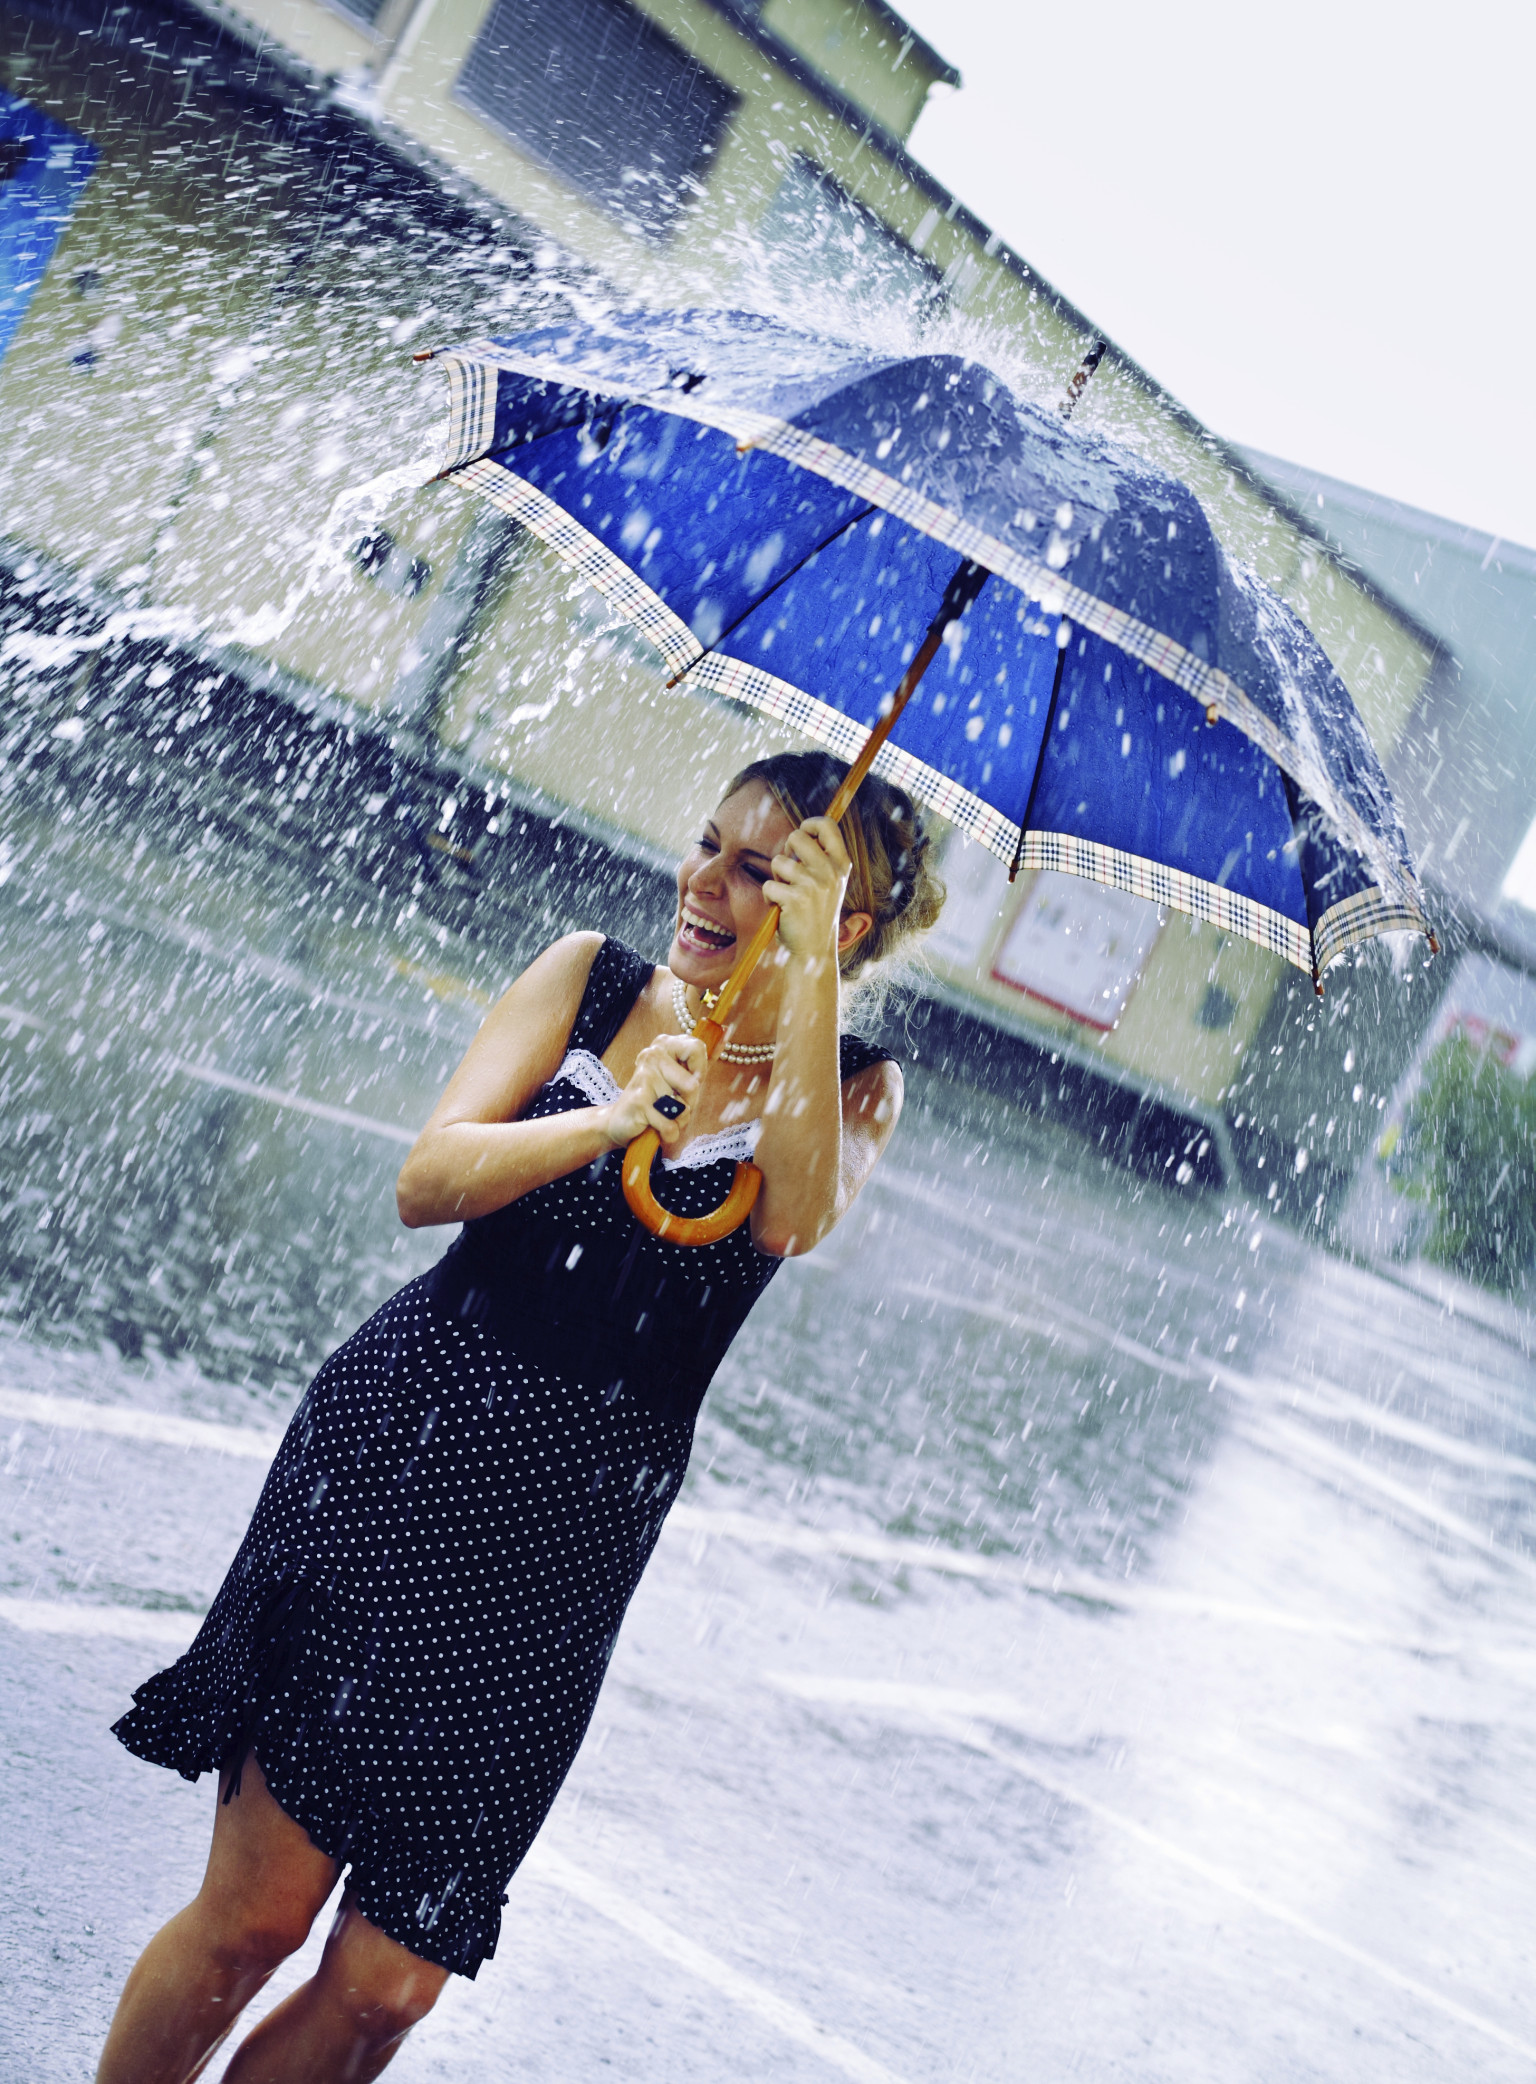 Singing In The Rain Stock Photo - Download Image Now - iStock